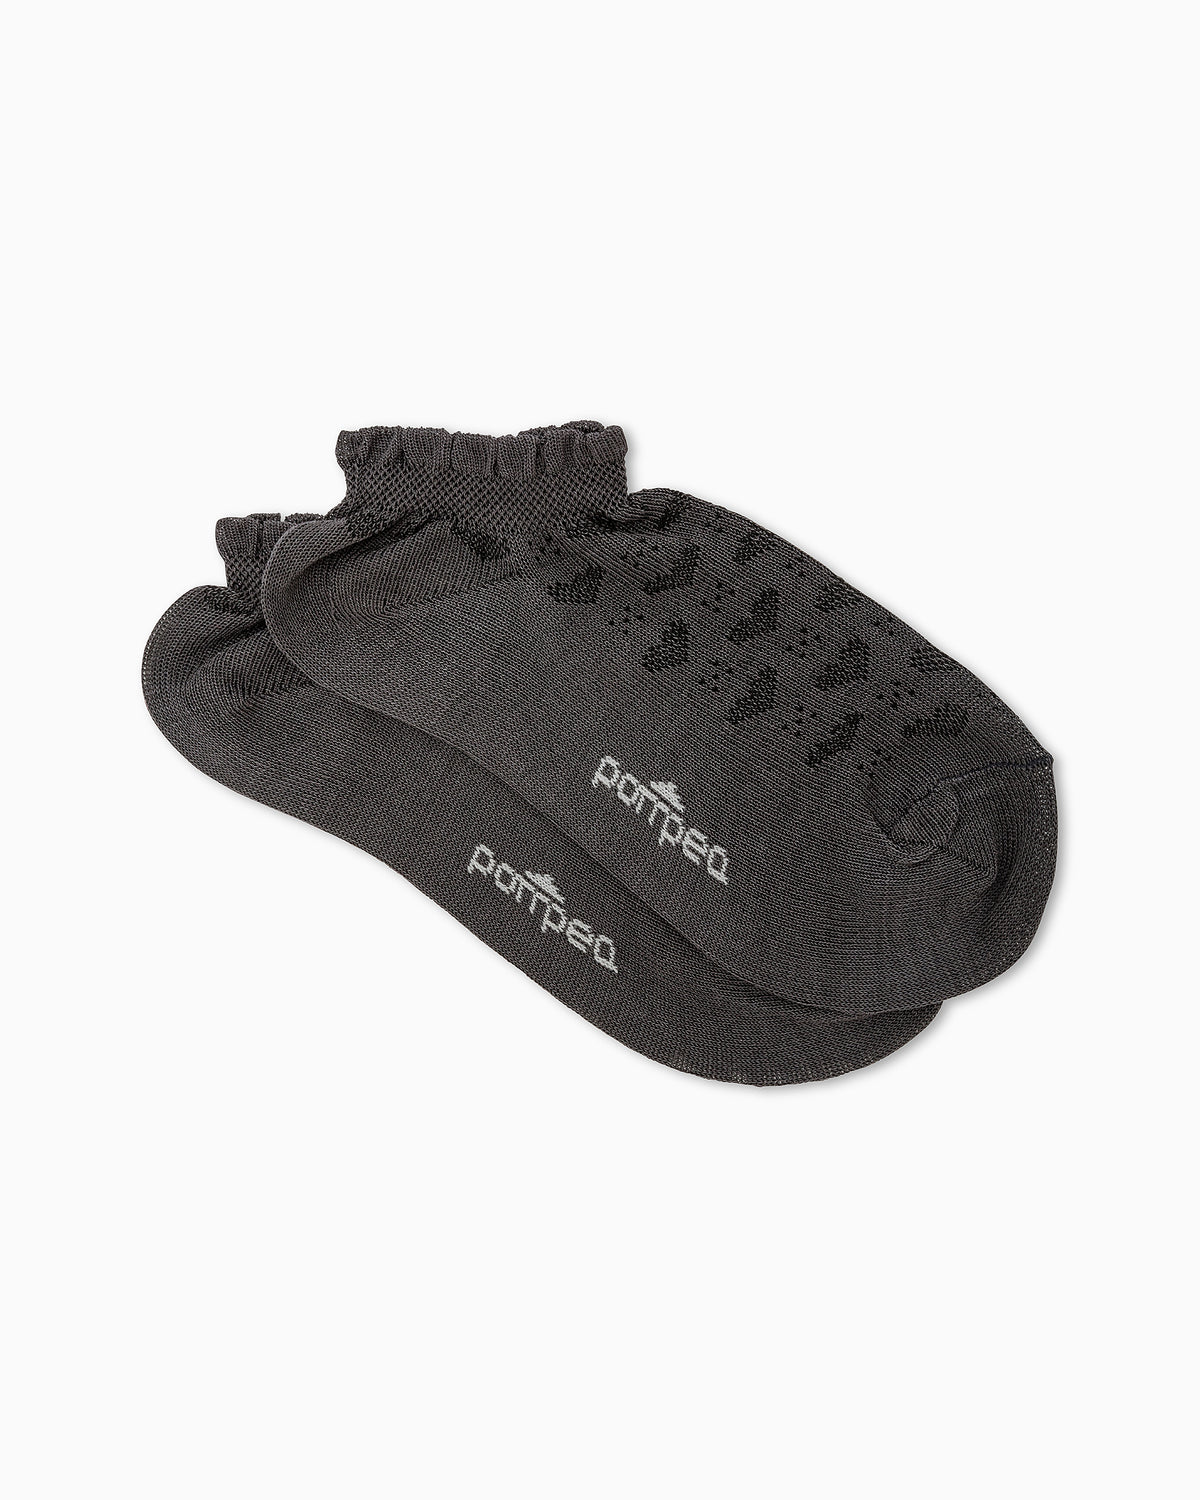 GIRLS' PERNICE TRAINER LINERS